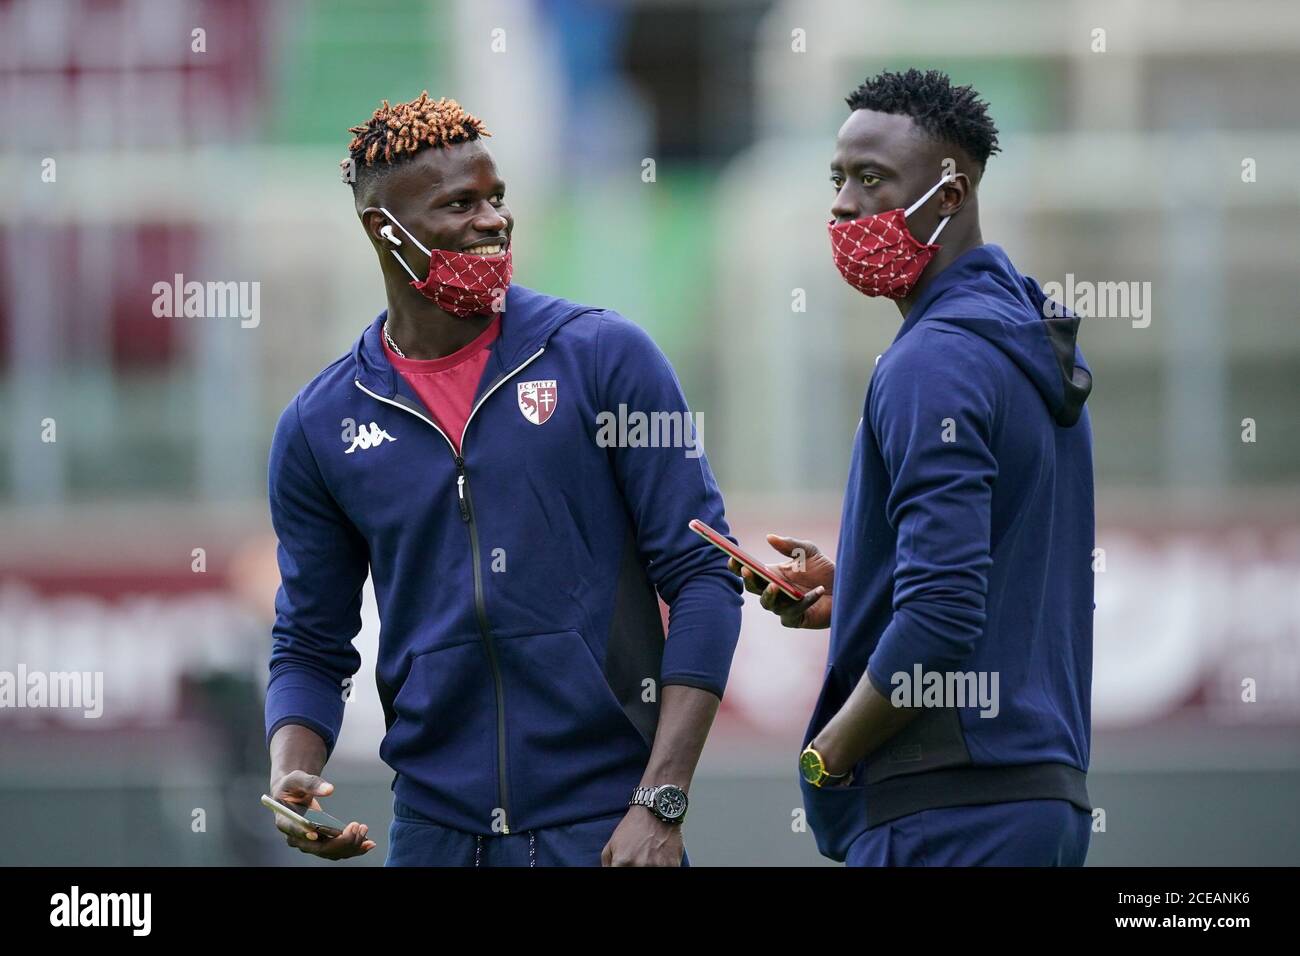 METZ, FRANCE - AUGUST 30: Papa Ndiaga Yade of Metz before the match between FC Metz and AS Monaco on August 30, 2020 in Metz, The Netherlands.  *** Local Caption *** Papa Ndiaga Yade Stock Photo